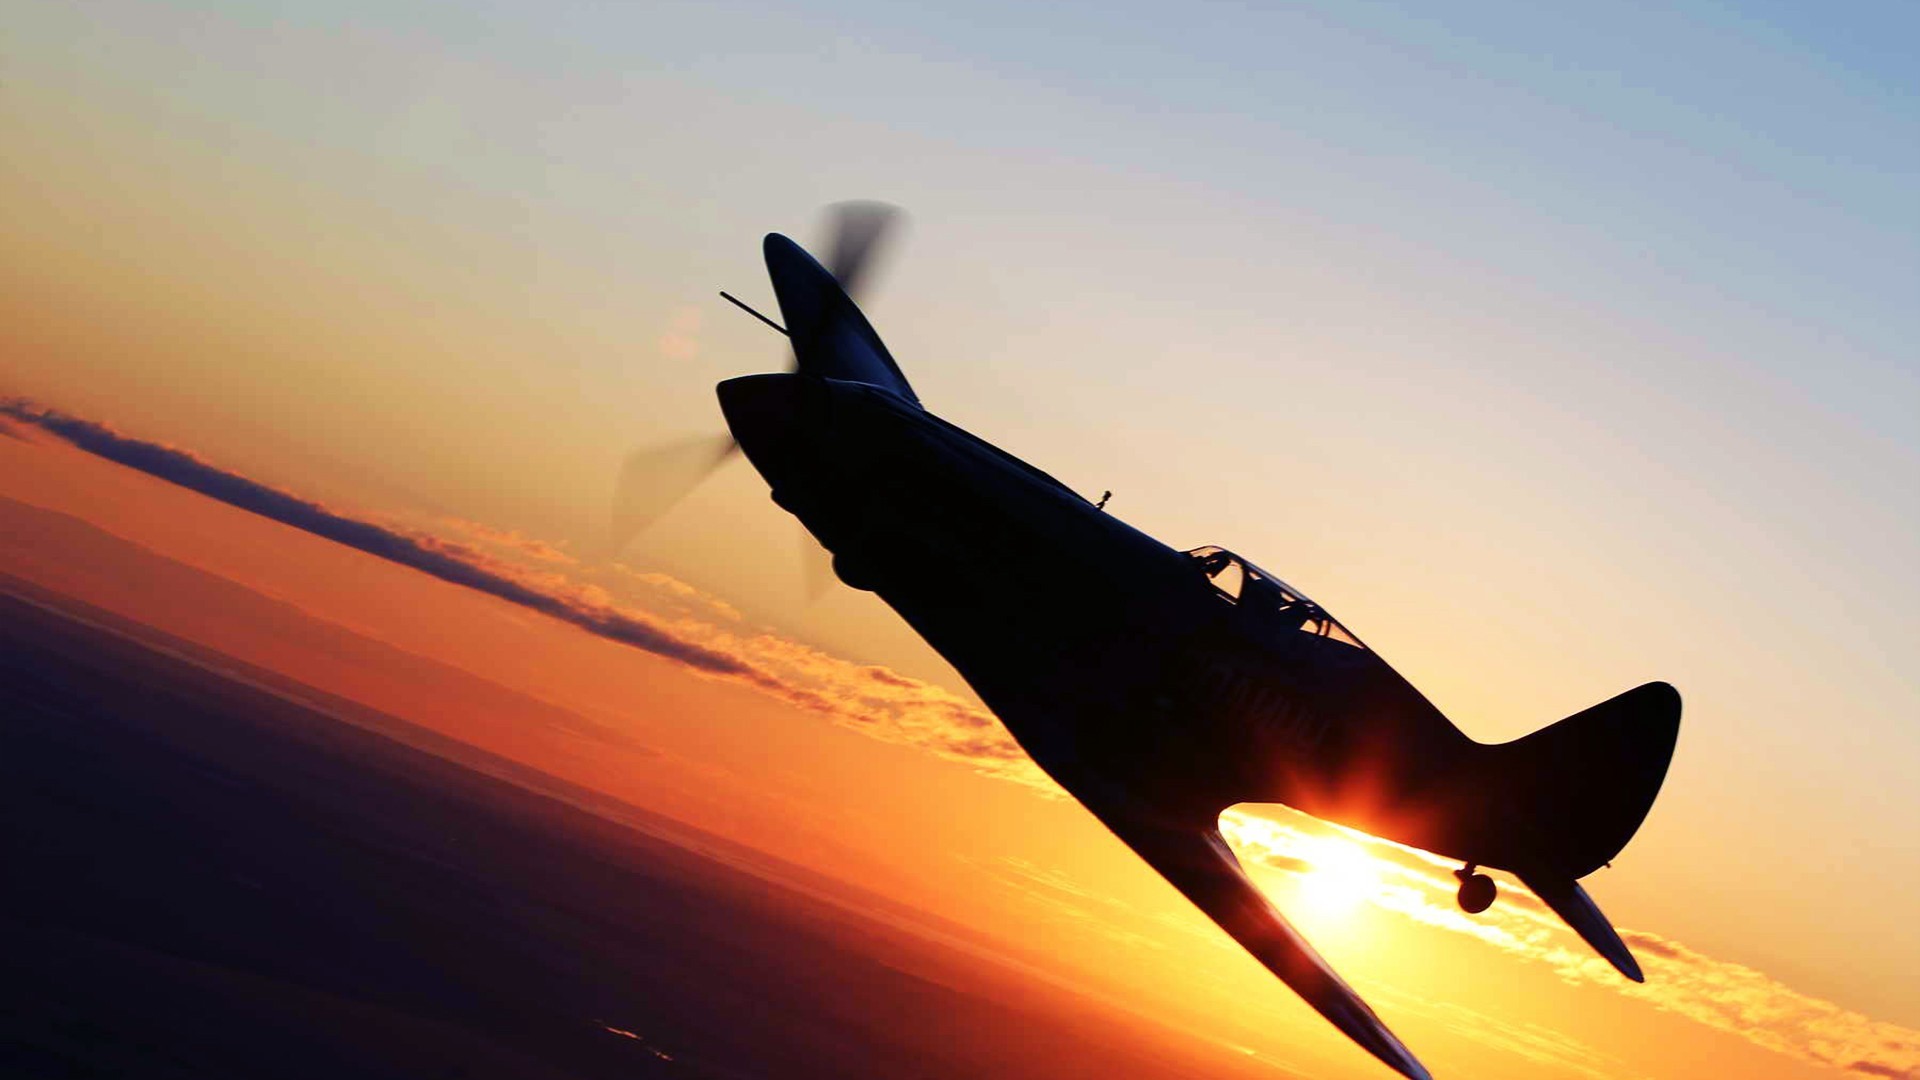 General 1920x1080 airplane sunlight silhouette military aircraft aircraft vehicle